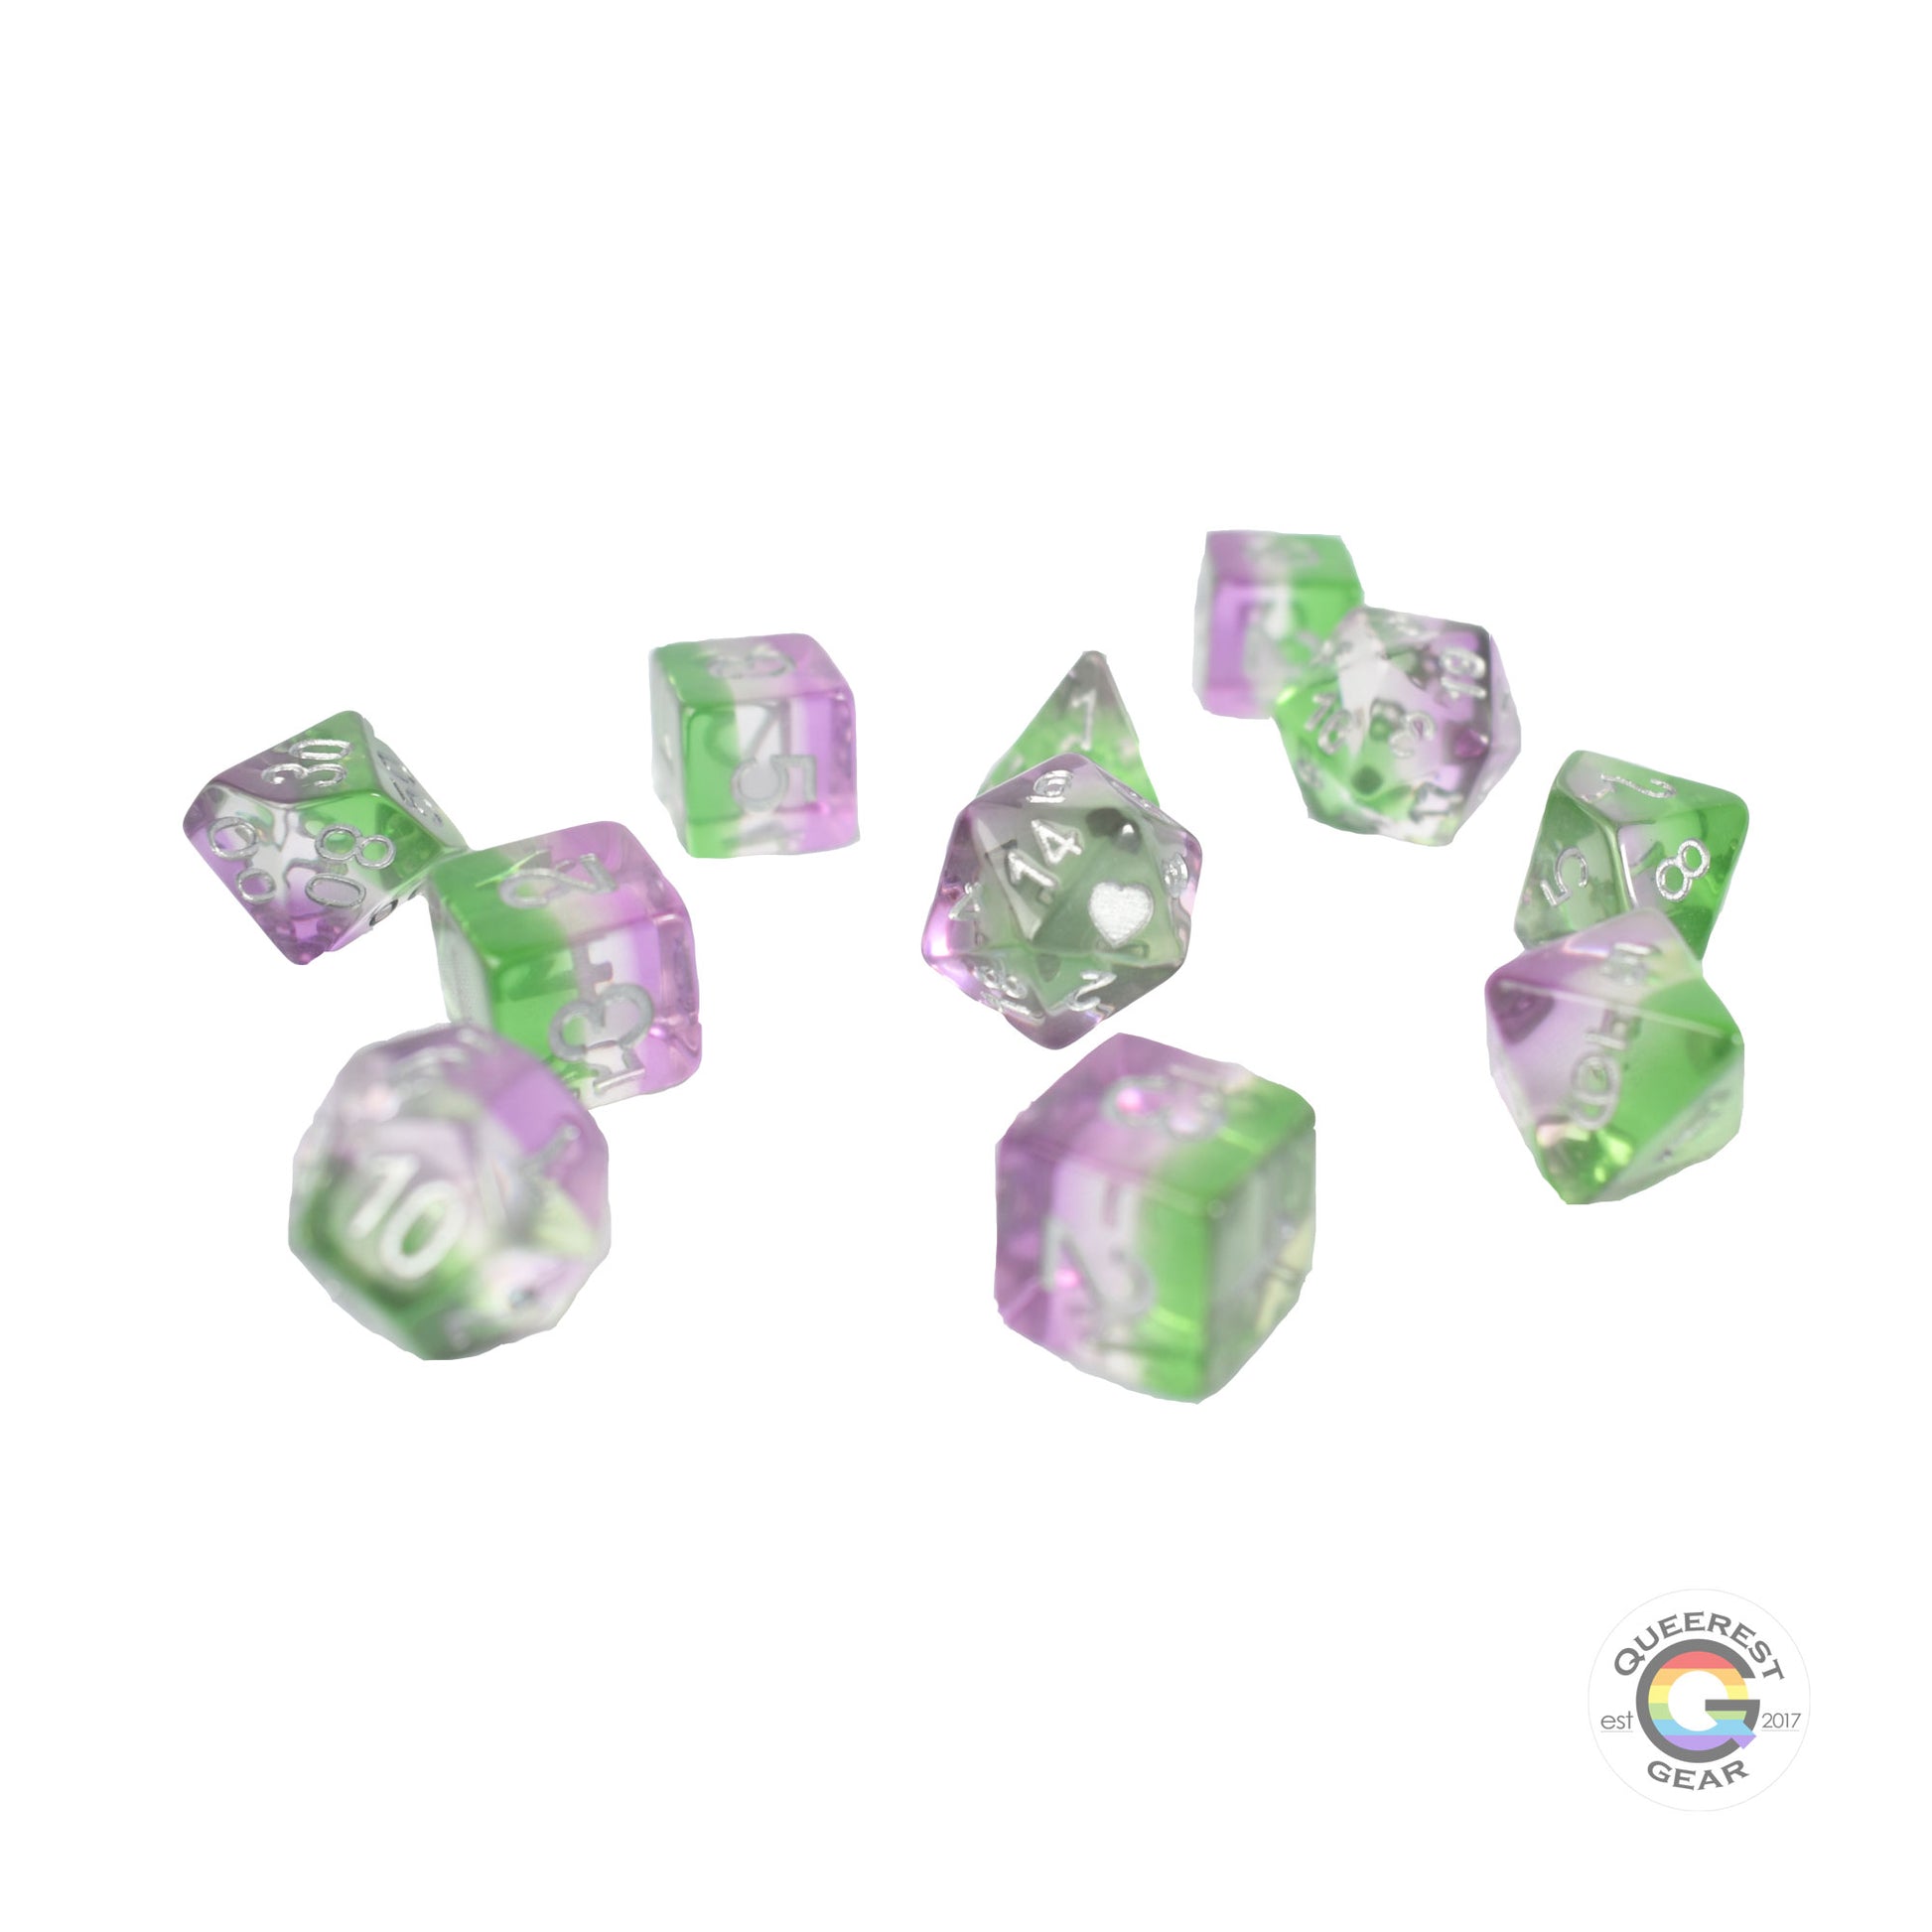 11 piece set of polyhedral dice scattered on a white background. They are transparent and colored in the stripes of the genderqueer flag with silver ink